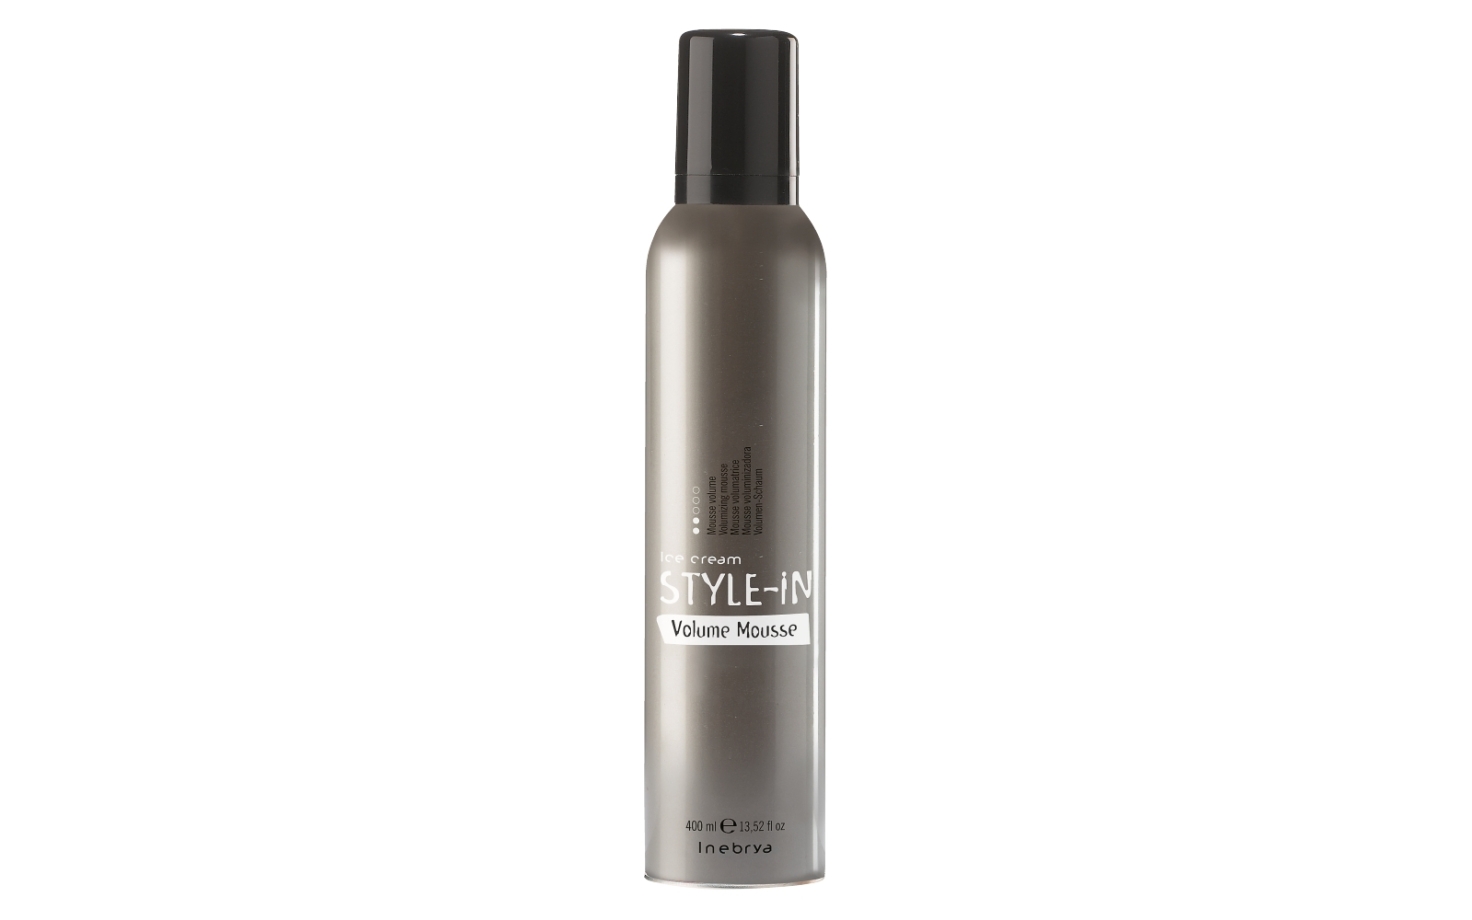 Style-In Volume Mousse